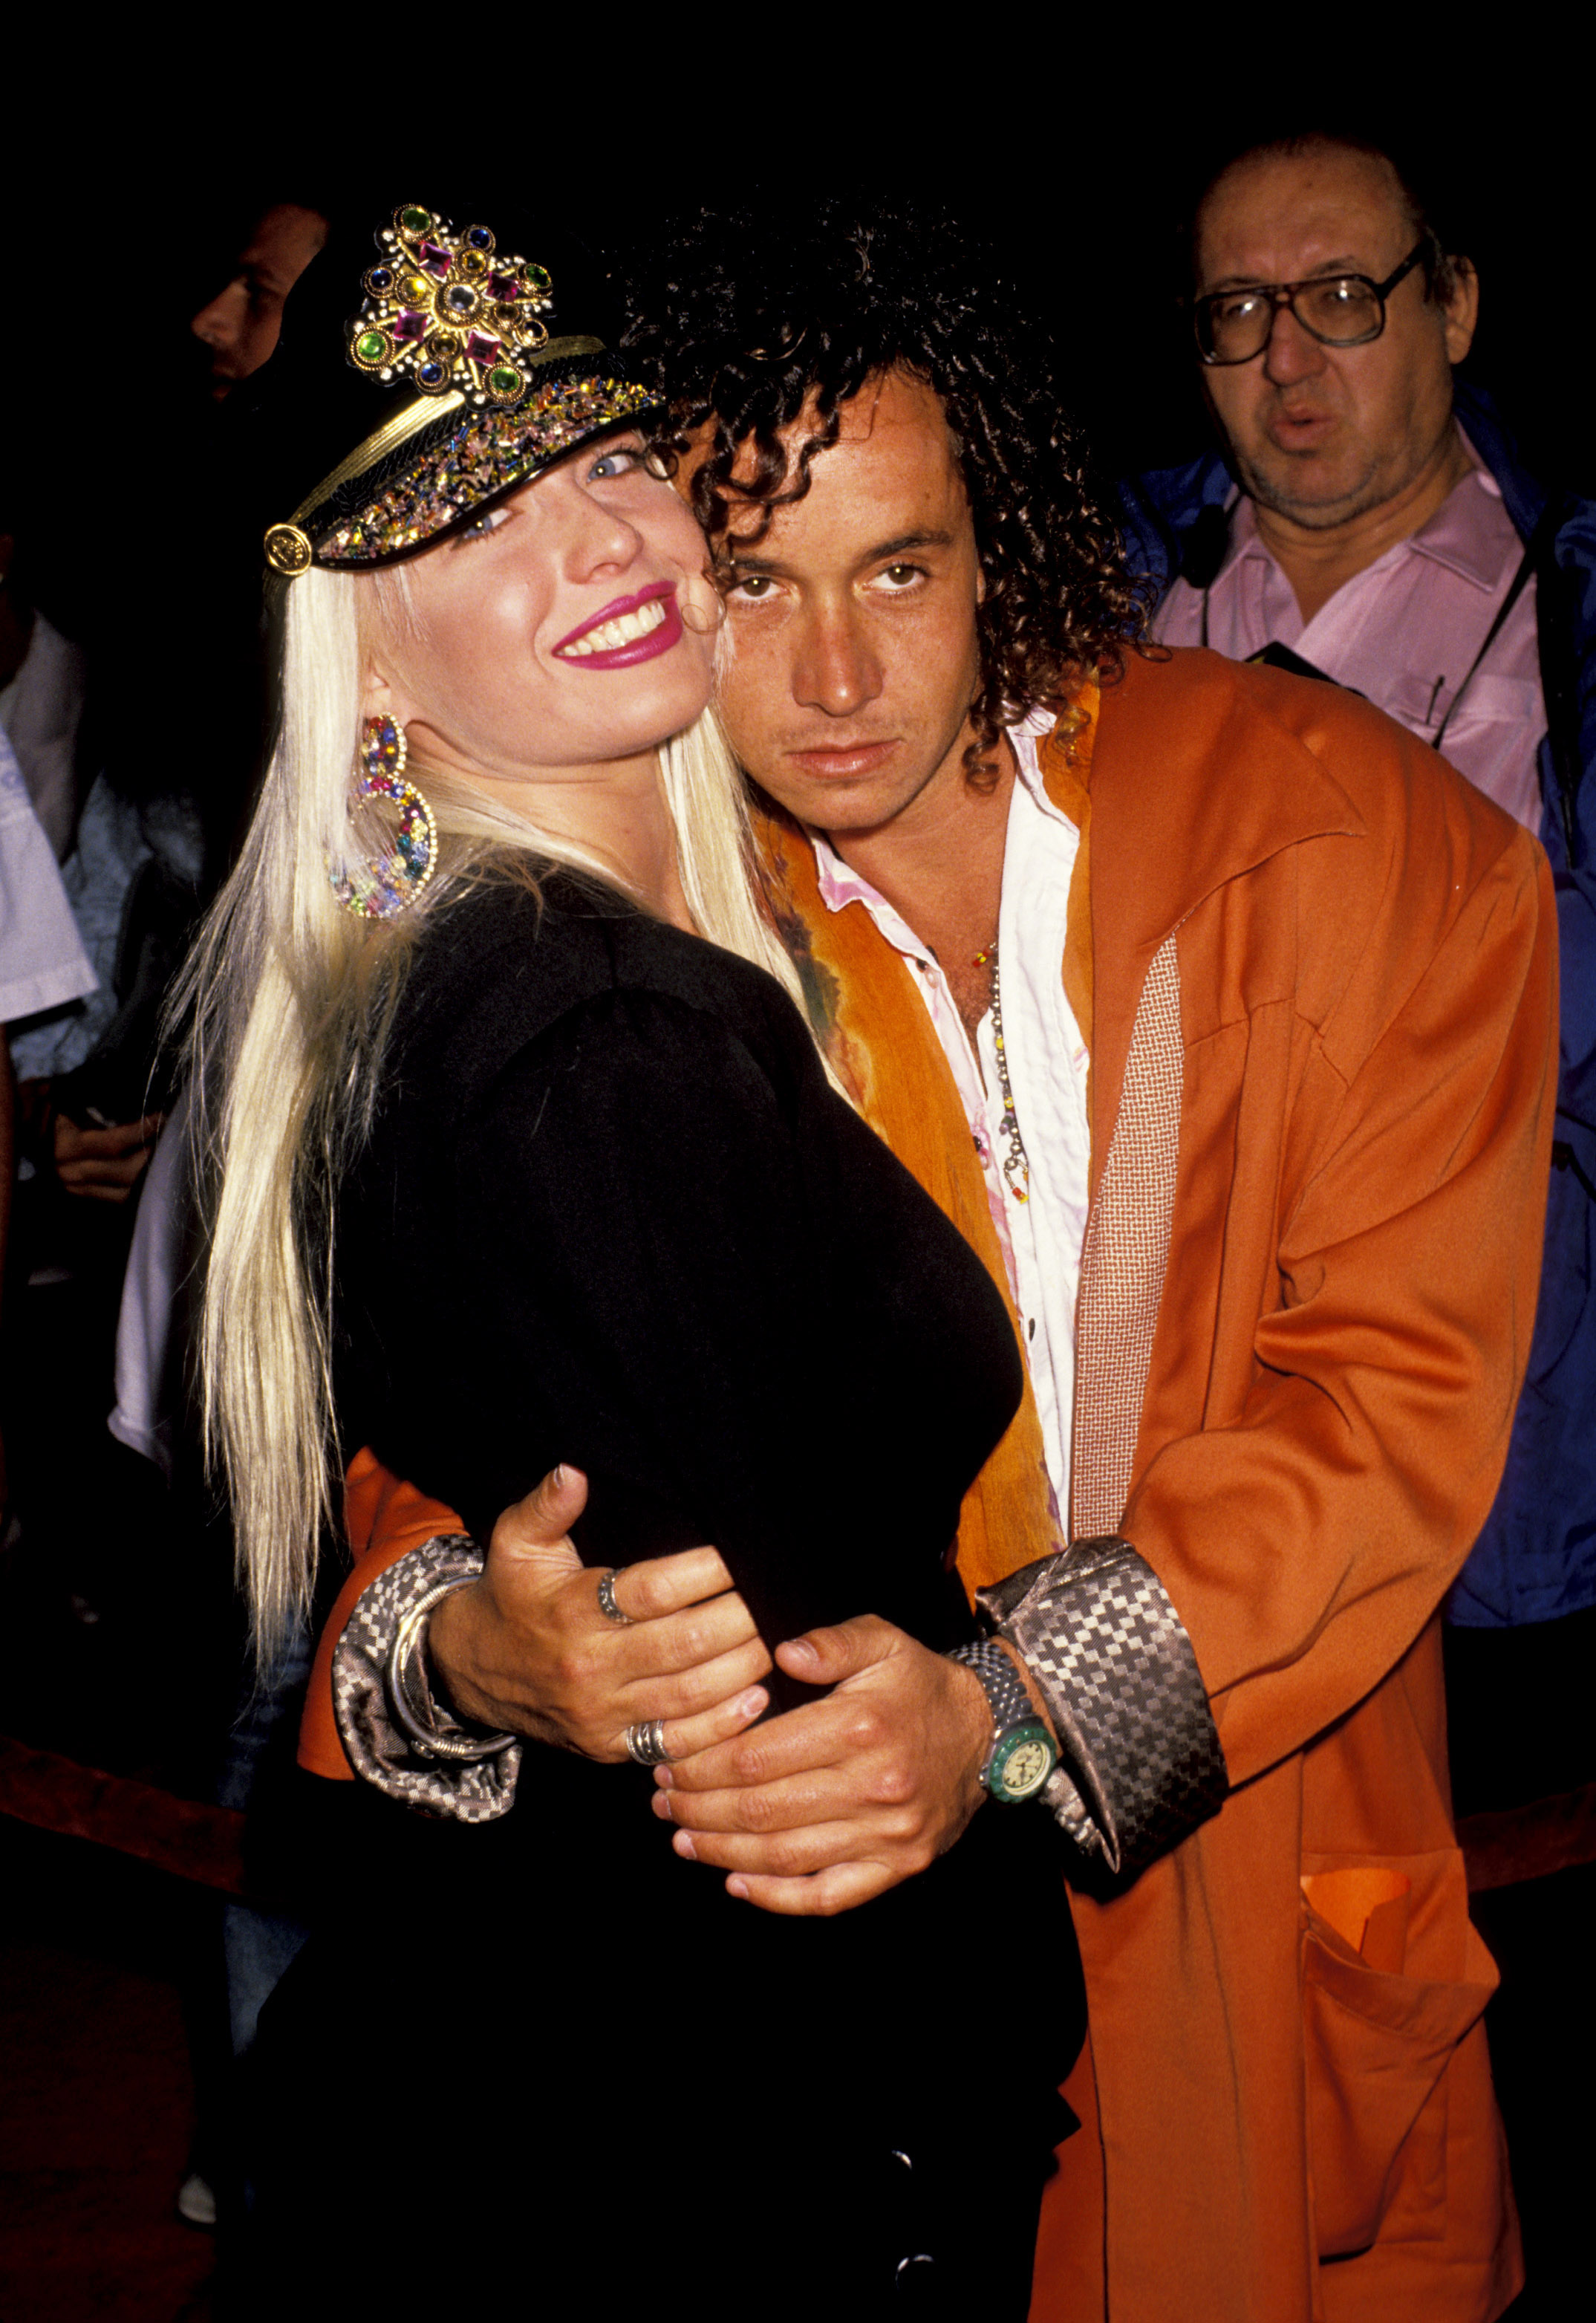 Shannon "Savannah" Wilsey and Pauly Shore attend the "Point Break" Los Angeles Premiere on July 10, 1991, in Hollywood, California. | Source: Getty Images